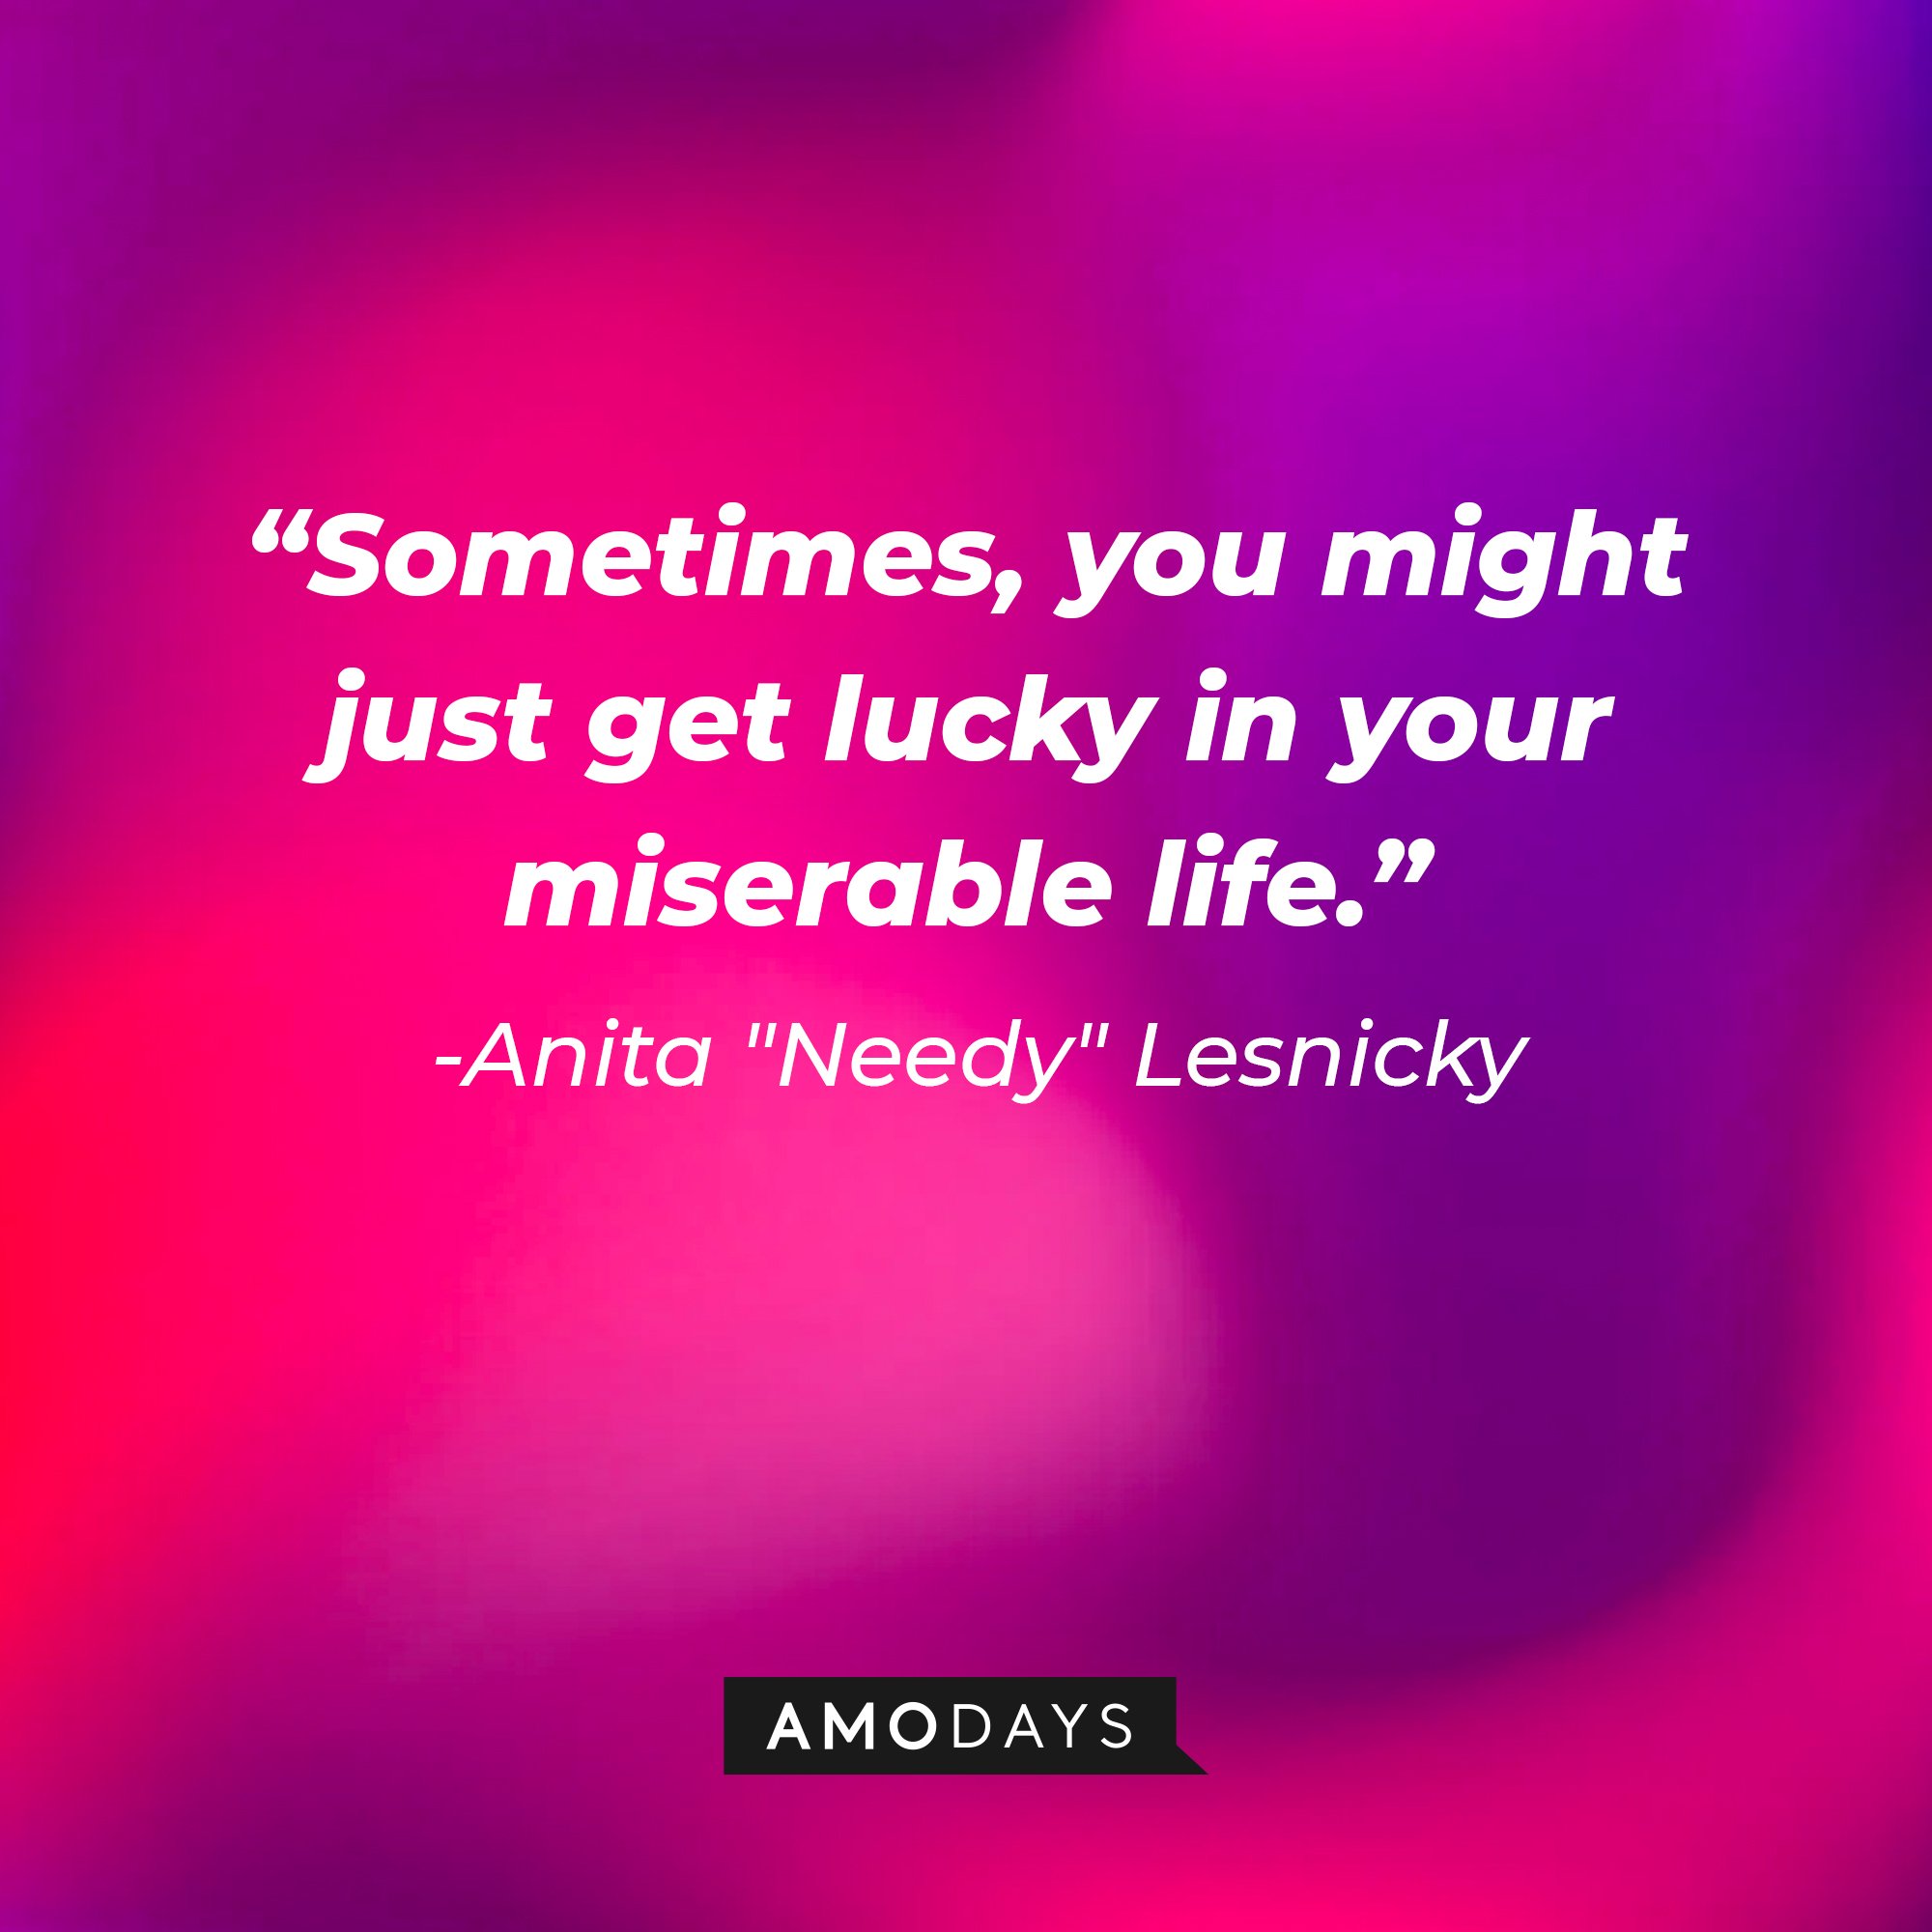 Anita "Needy" Lesnicky’s quote: “Sometimes, you might just get lucky in your miserable life.” |Image: AmoDays